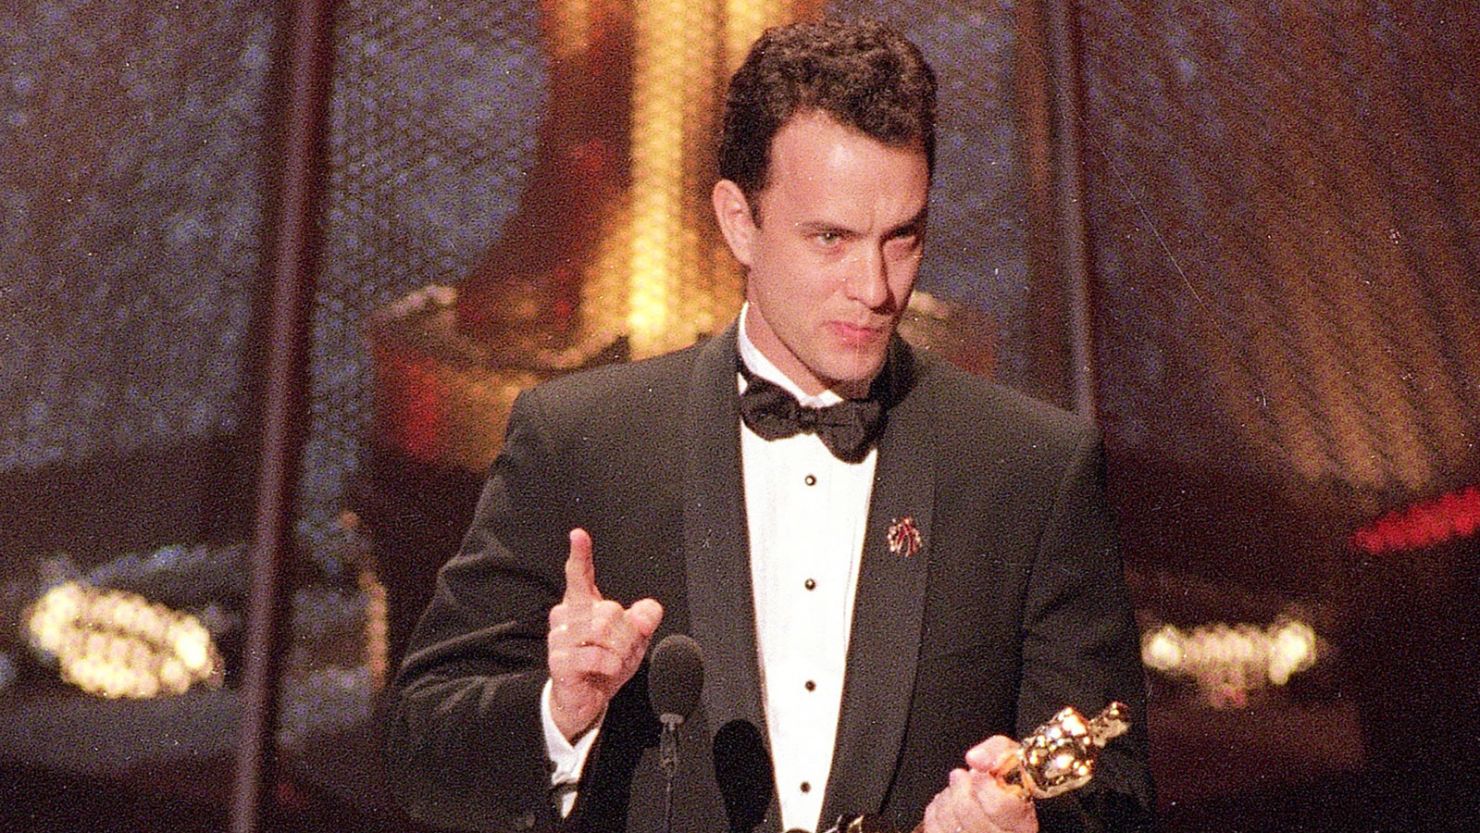 Tom Hanks gives a powerful acceptance speech at the 66th Annual Academy Awards on March 21, 1994. Hanks won for his role in the movie "Philadelphia."